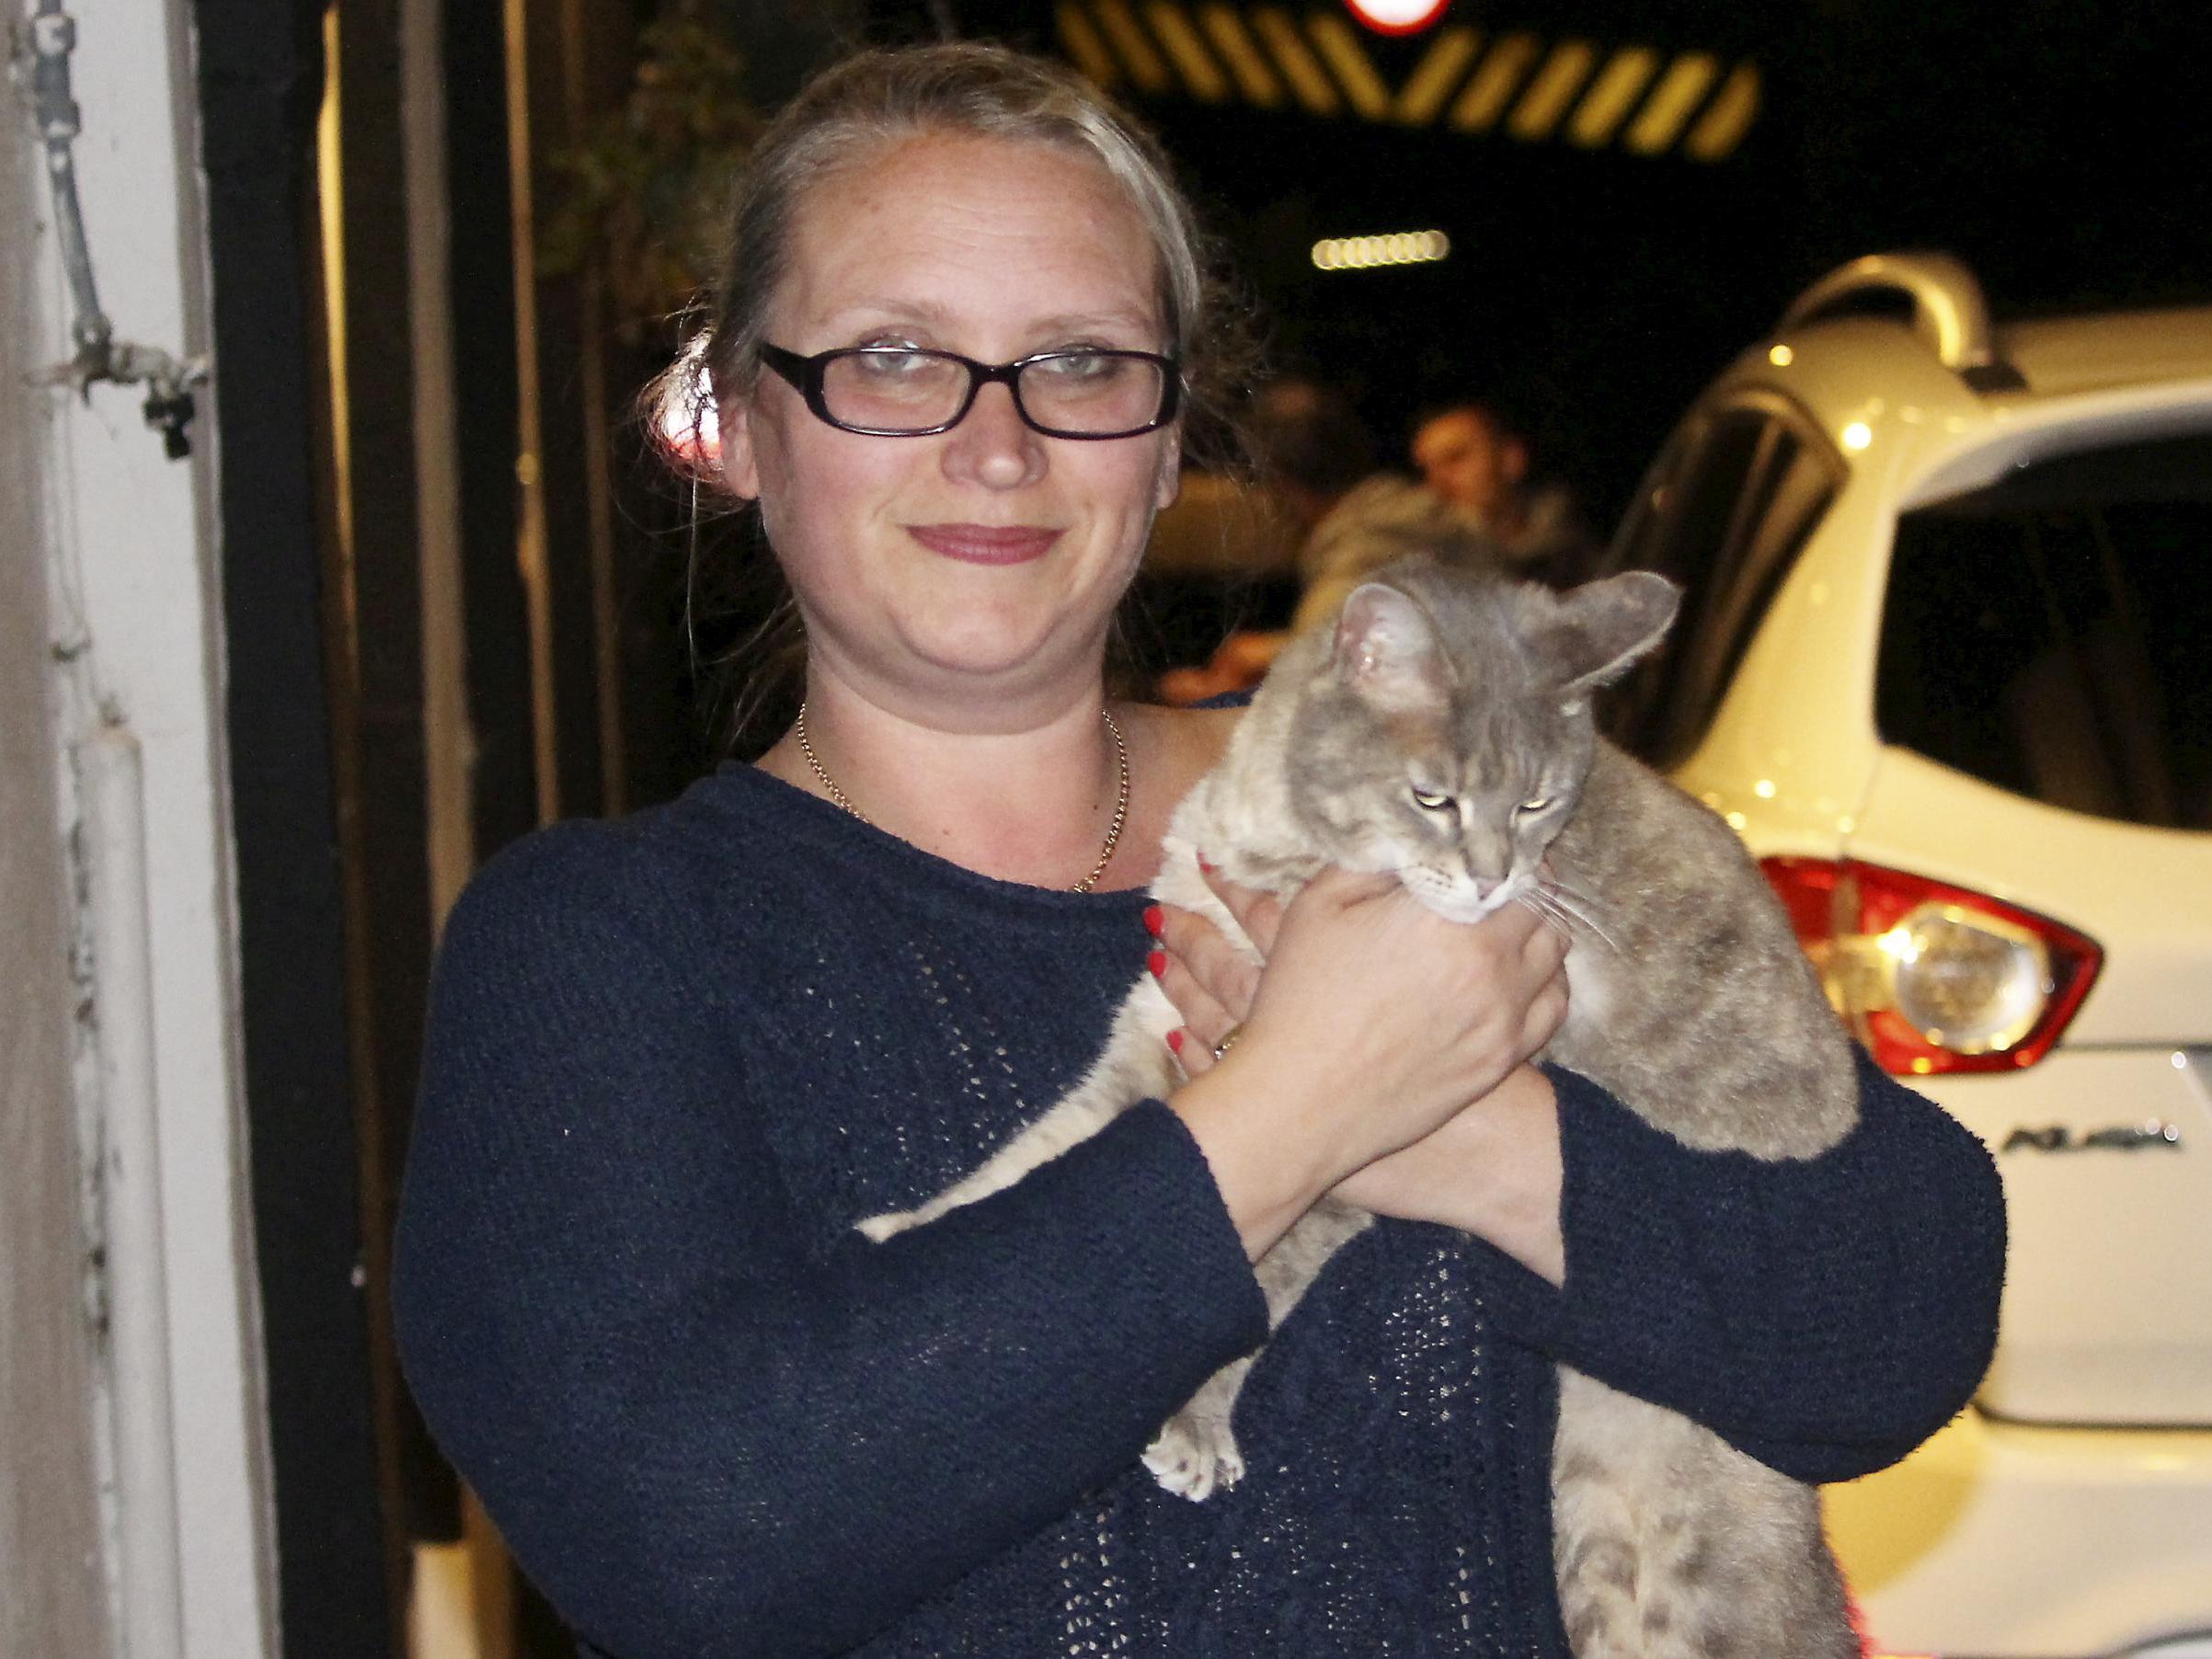 Kirsty Howden, 39, of Saltash, Cornwall, is reunited with her pet cat Hatty, who was stuck up a bridge for six days.